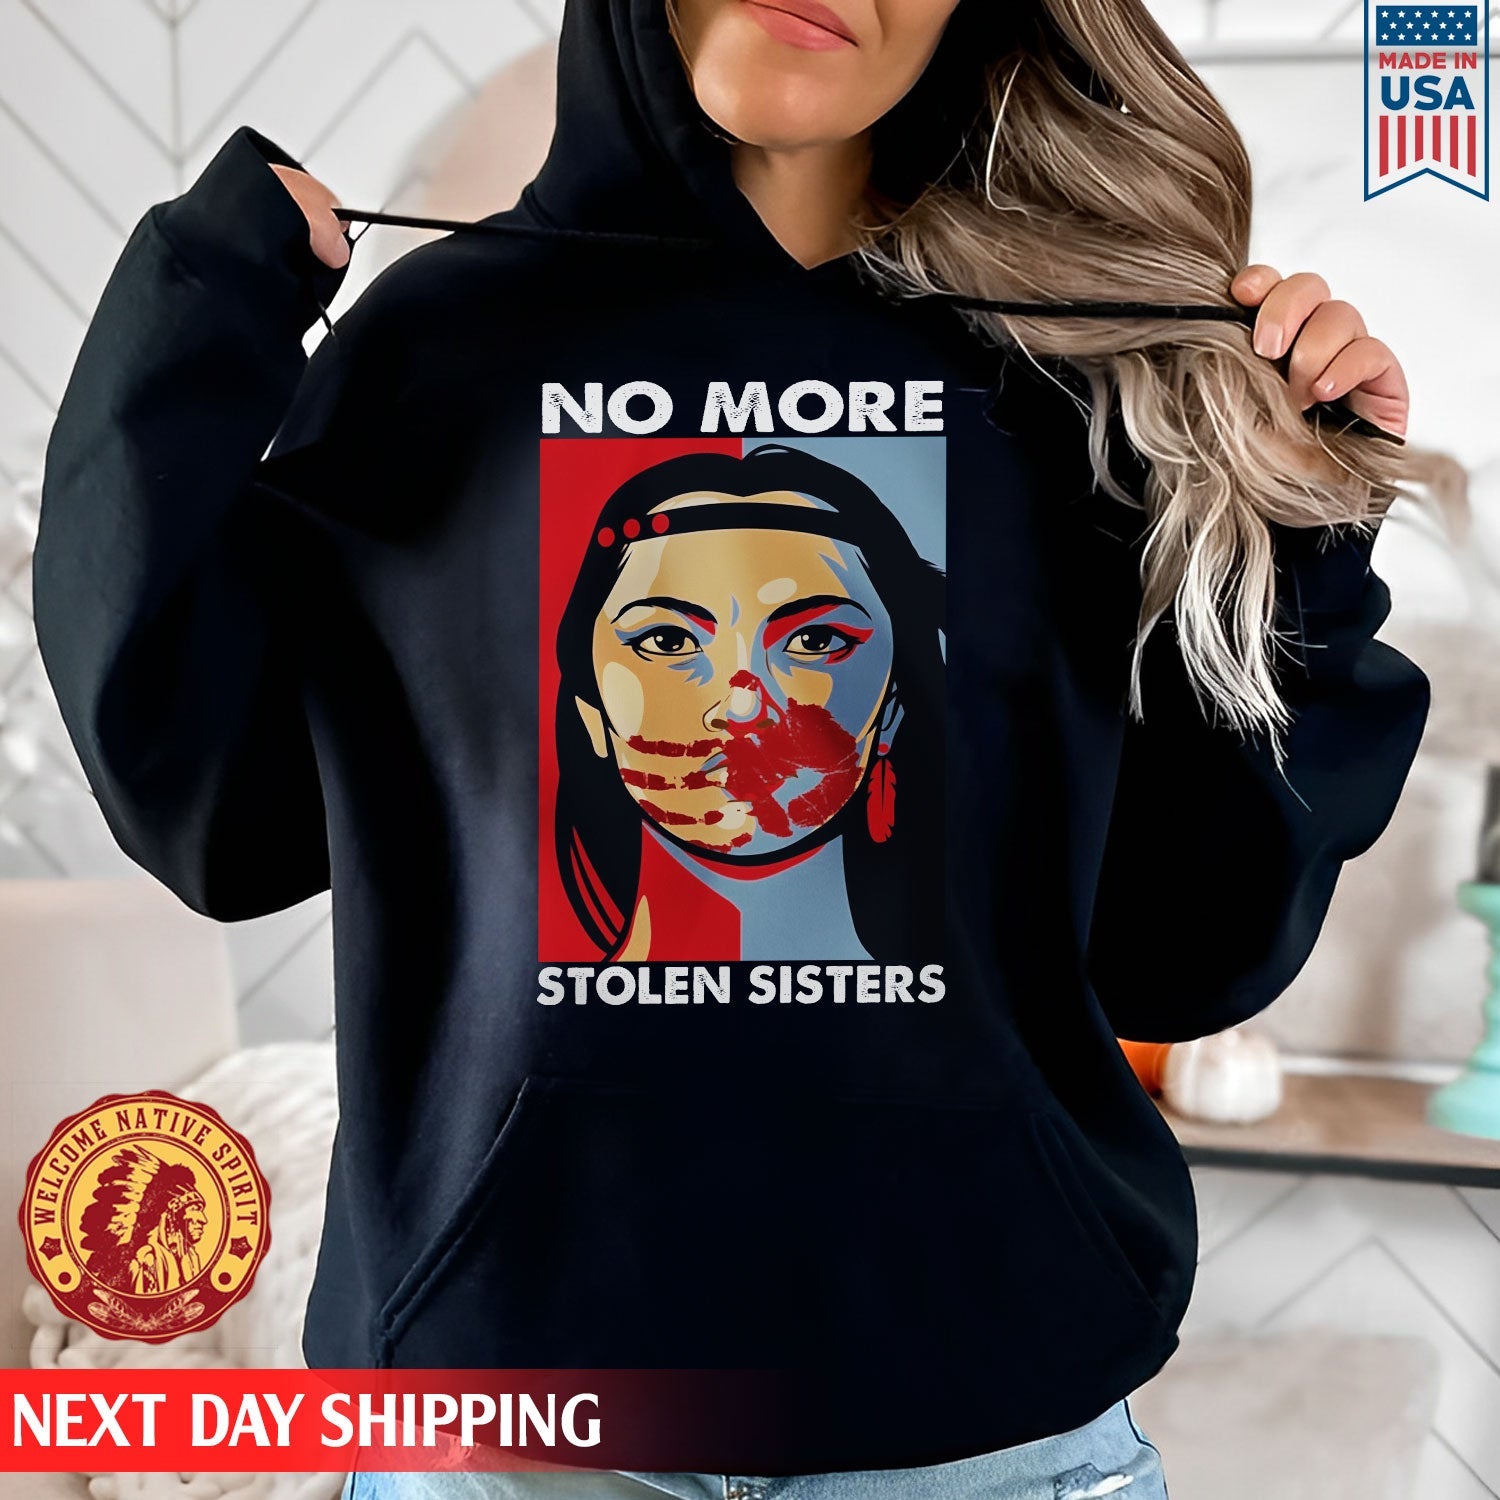 MMIW - No More Stolen Sisters Red Hand Woman Shirt 019